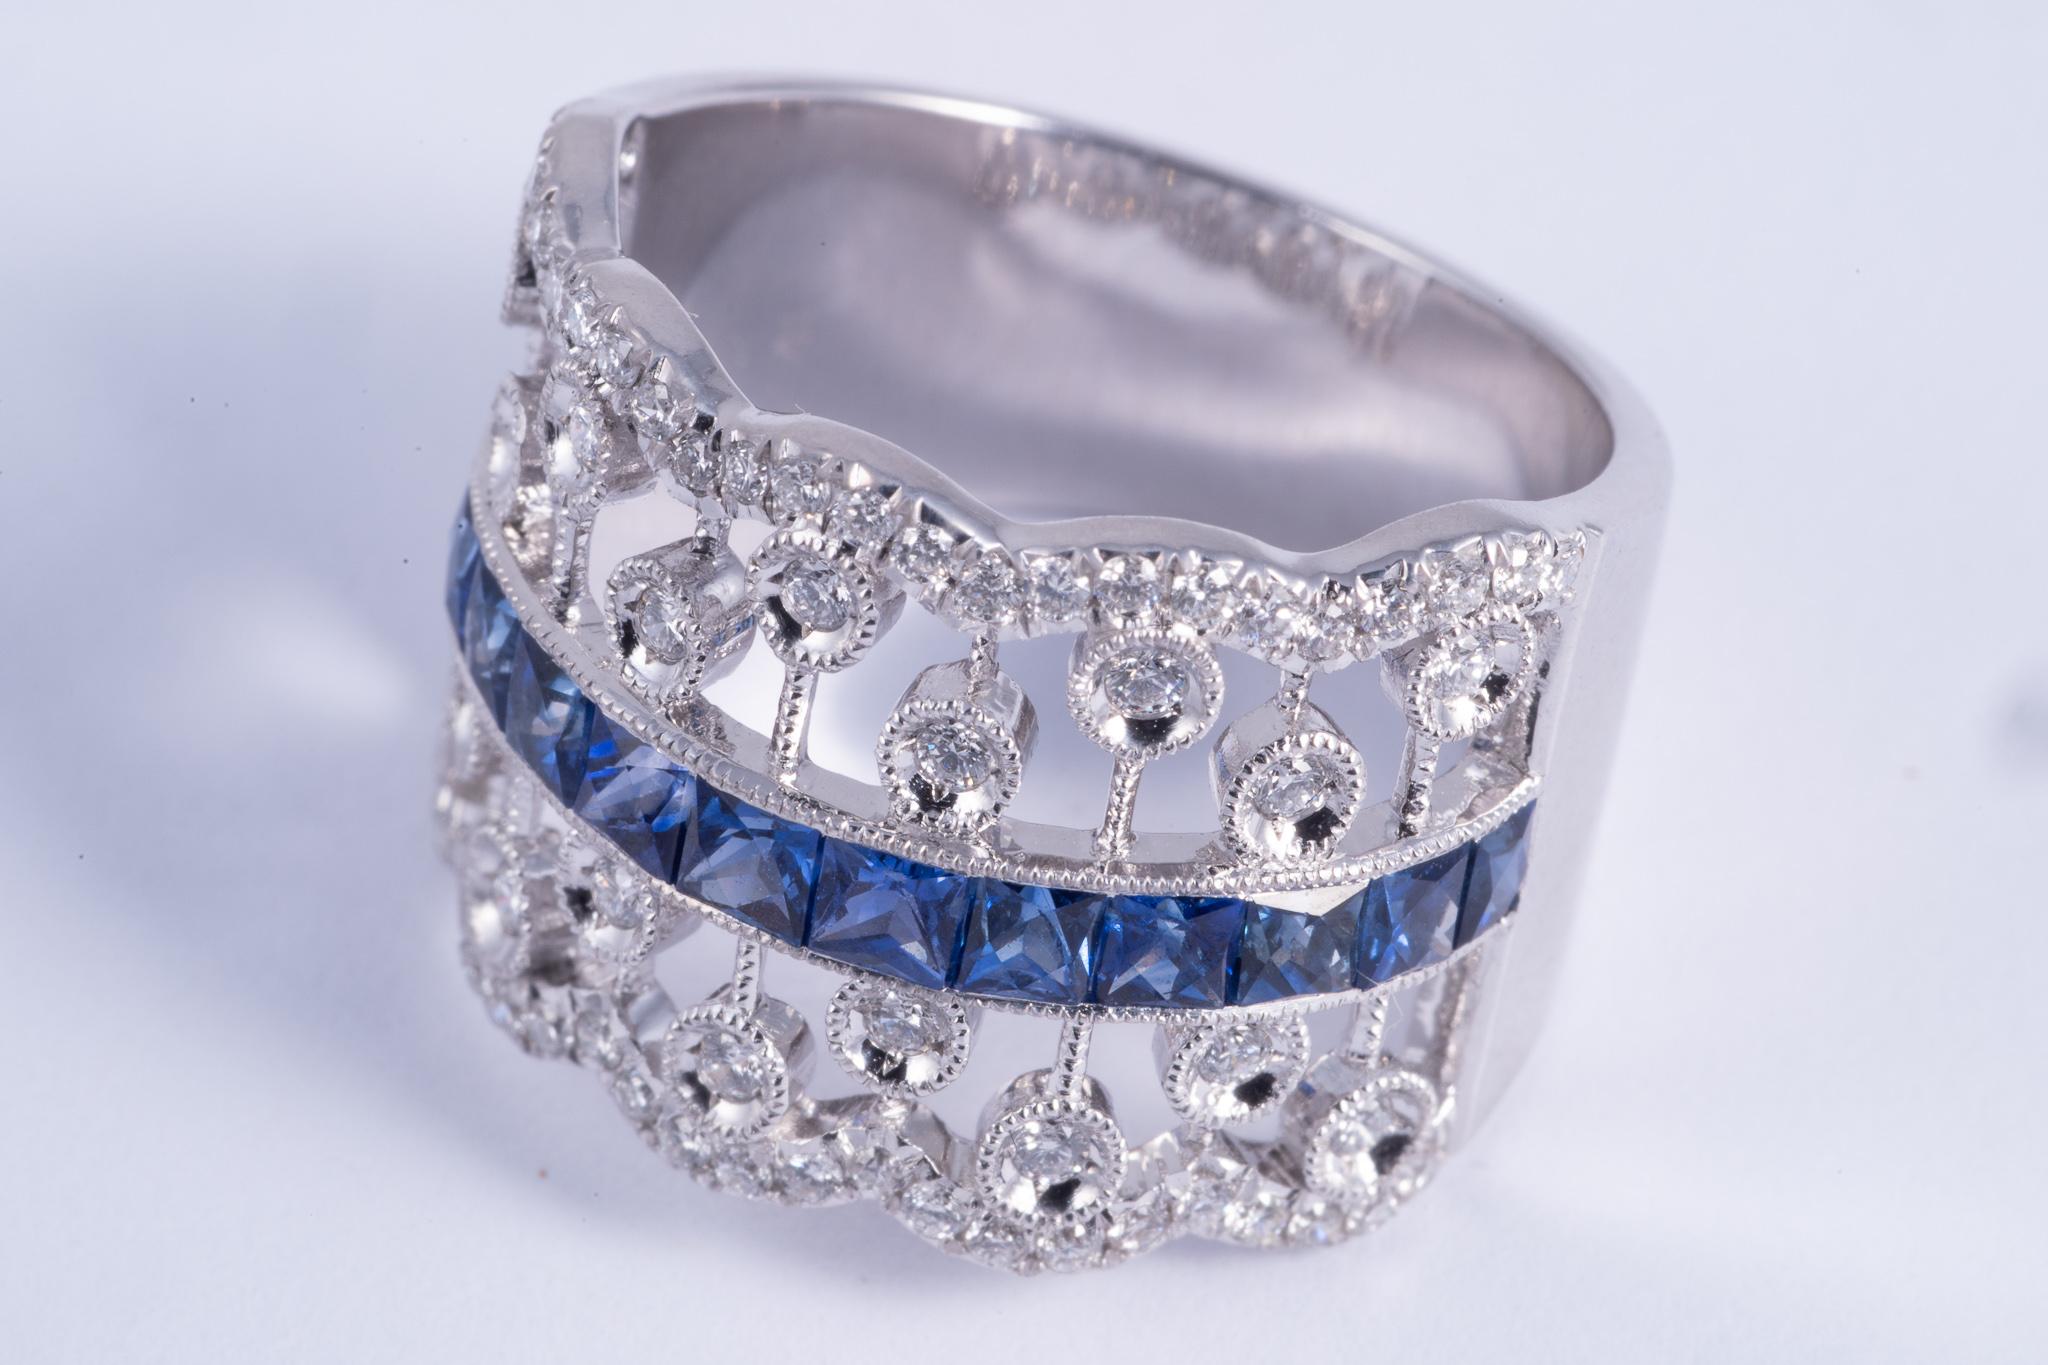 This very beautiful ring features french cut blue sapphires. The sapphires weigh 1.46cts total. The accent diamonds have G-H color and SI1 clarity. The ring is set in 14k white gold. the gold weighs 7.80grams. It is a size 6.75 and can be sized.